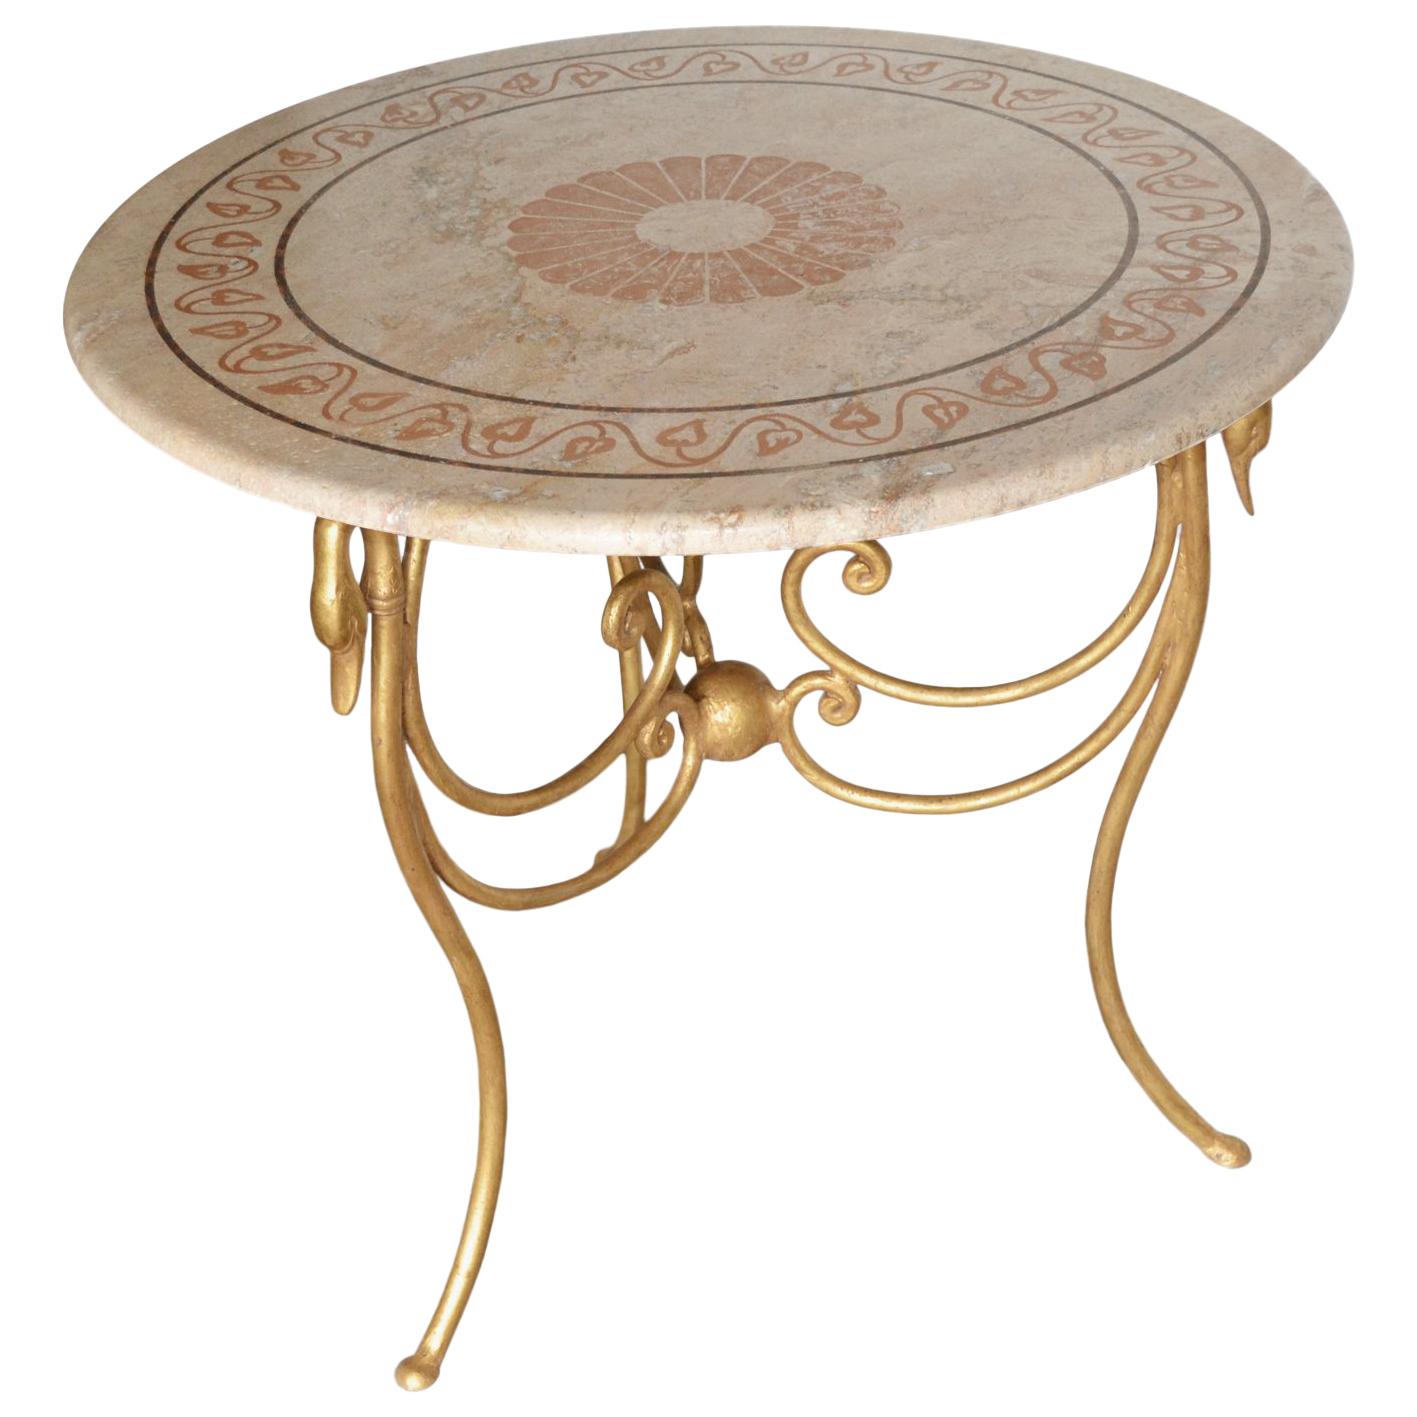 Side table round travertine top gilted iron base handmade in Italy available For Sale